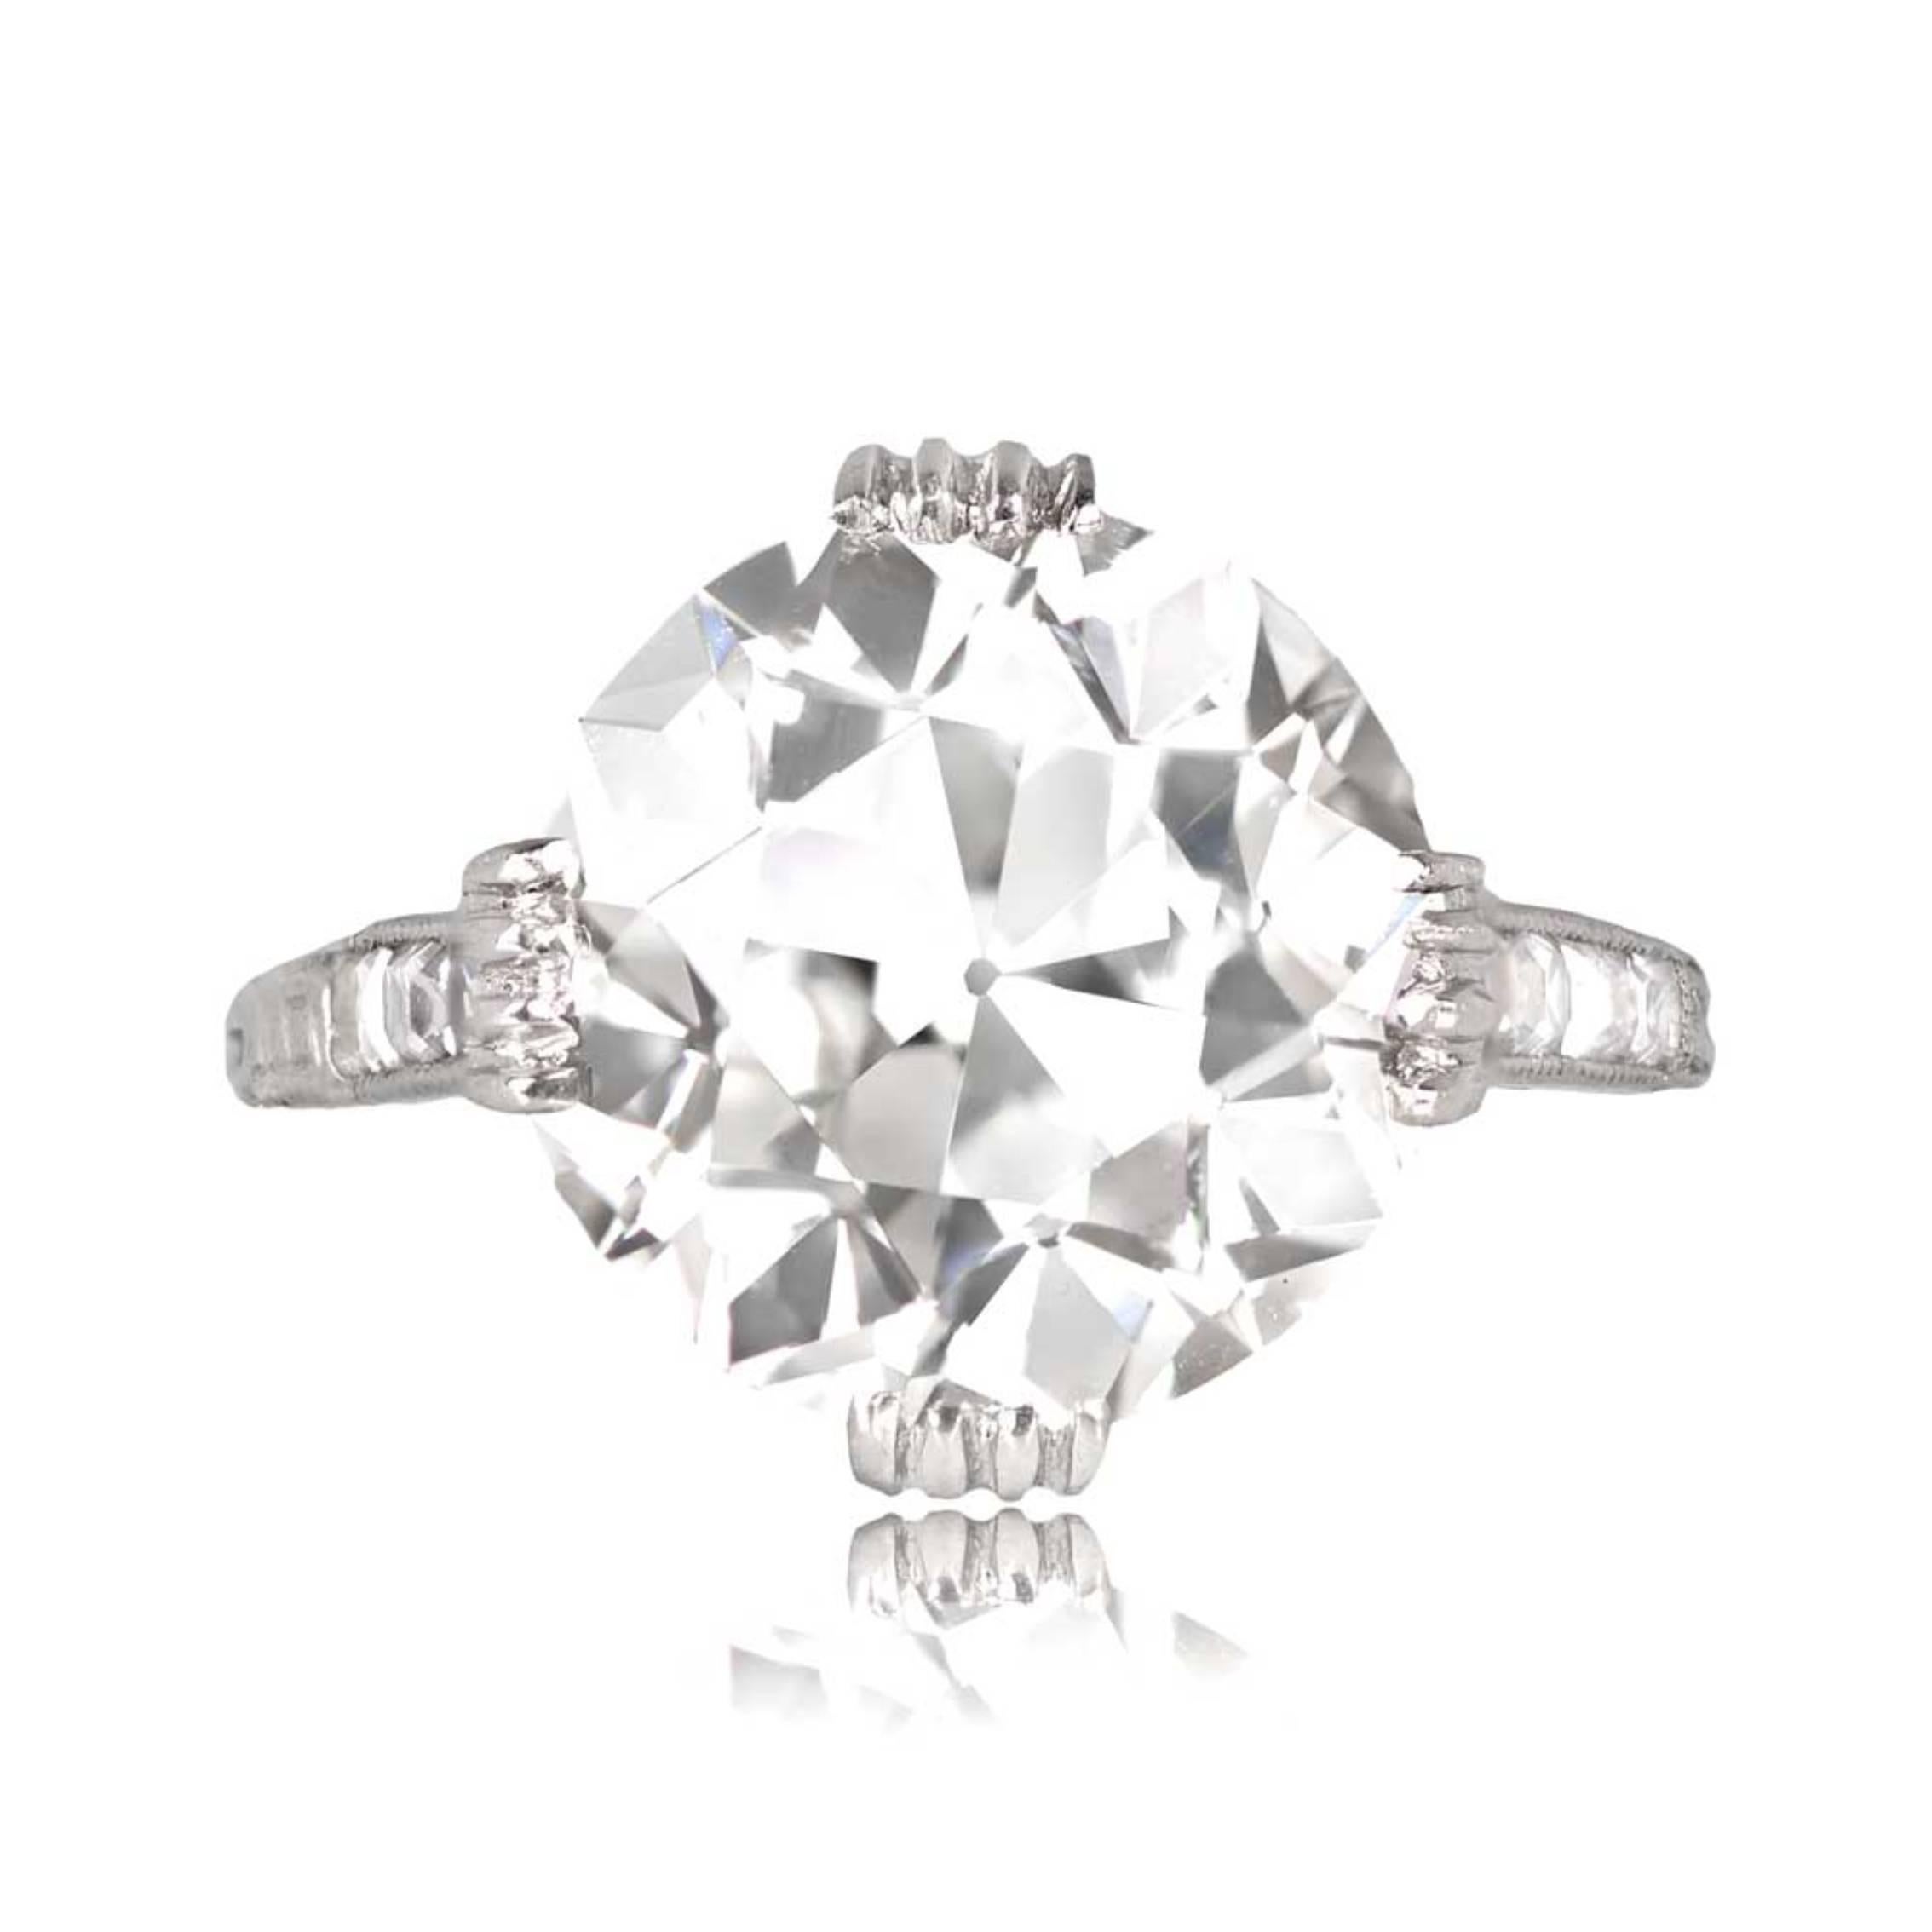 A platinum solitaire ring with a 7.55-carat GIA-certified old European diamond (K color, VVS2 clarity) in a prong setting. The ring also boasts antique French cut diamonds on the shoulders, and the mounting is adorned with intricate open-work, hand